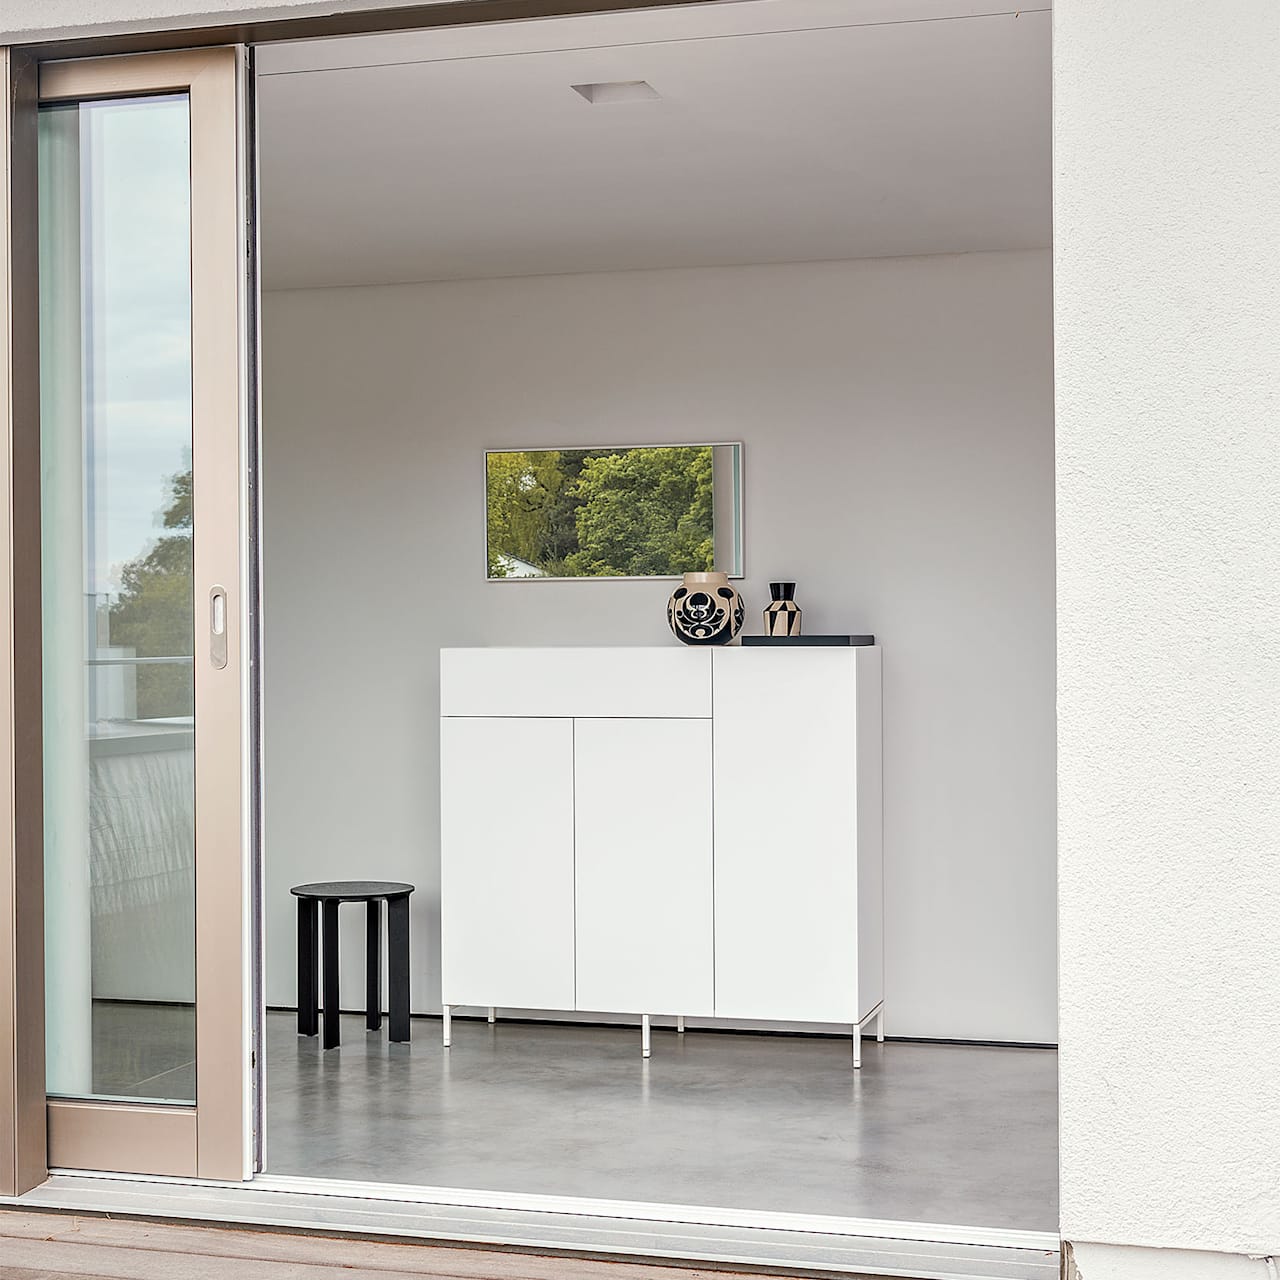 Urban Sideboard with Doors and Drawer